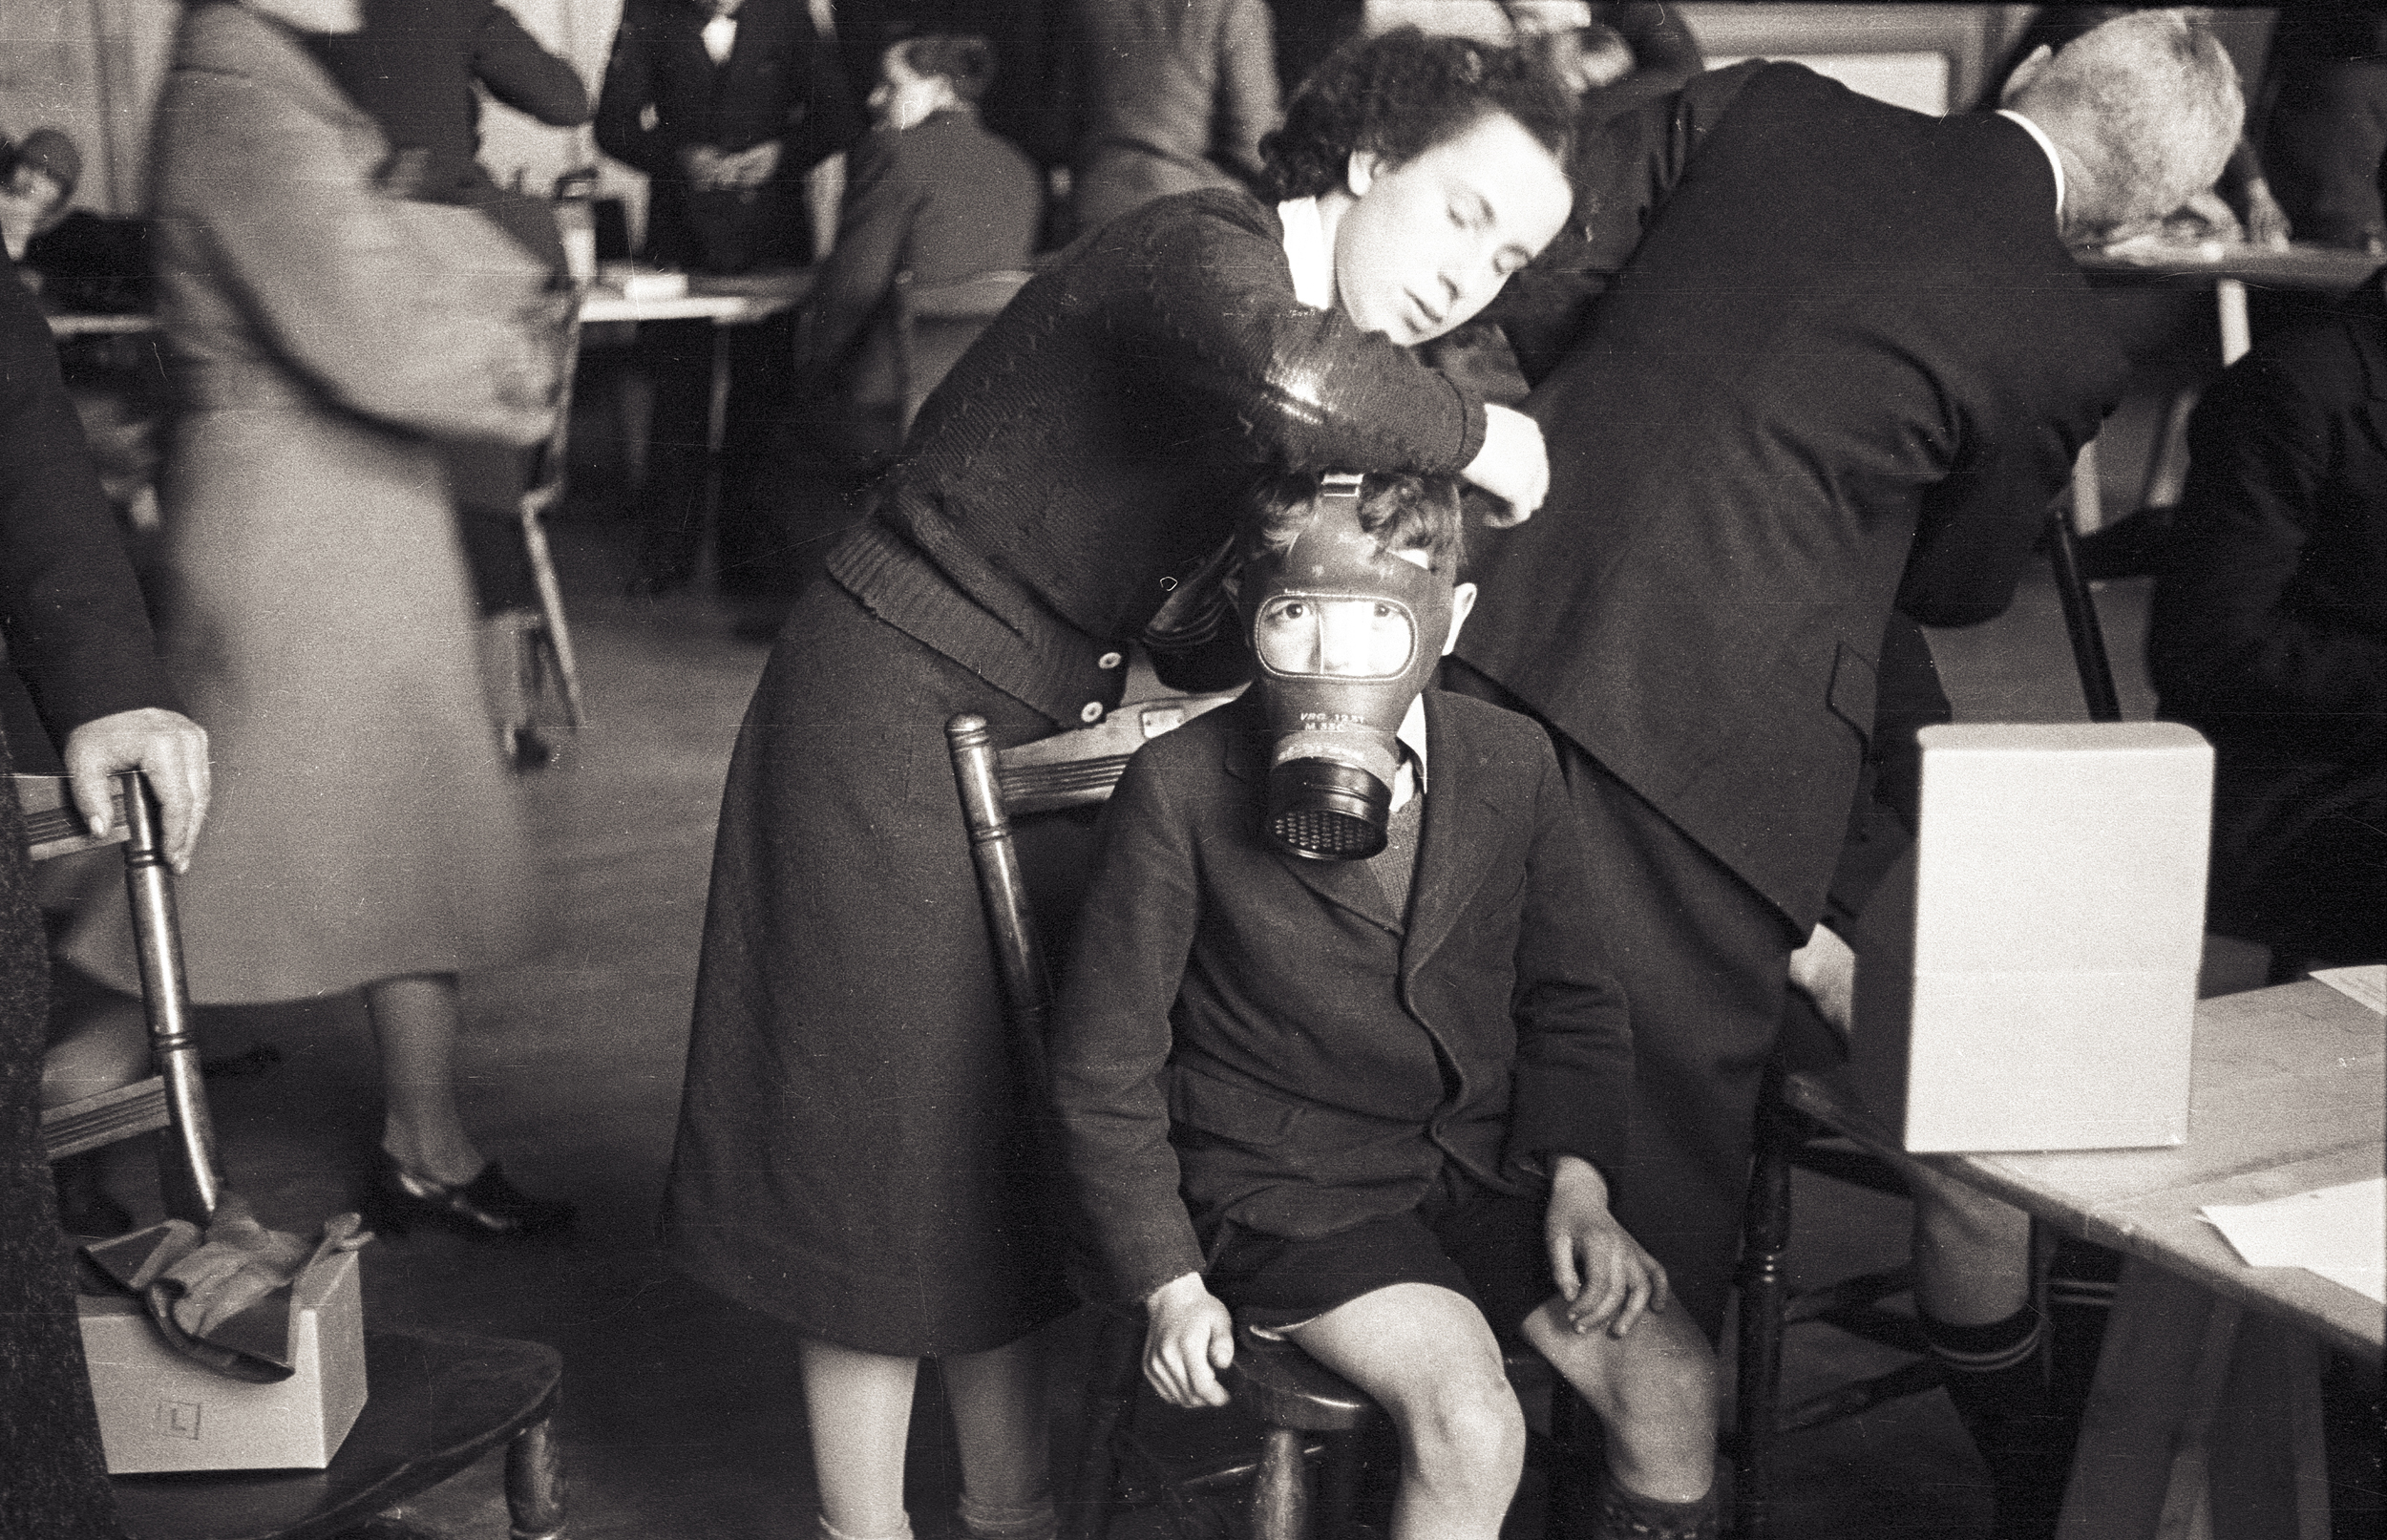 "Gas Mask Fitting, St Andrews" by George M. Cowie, 1940.